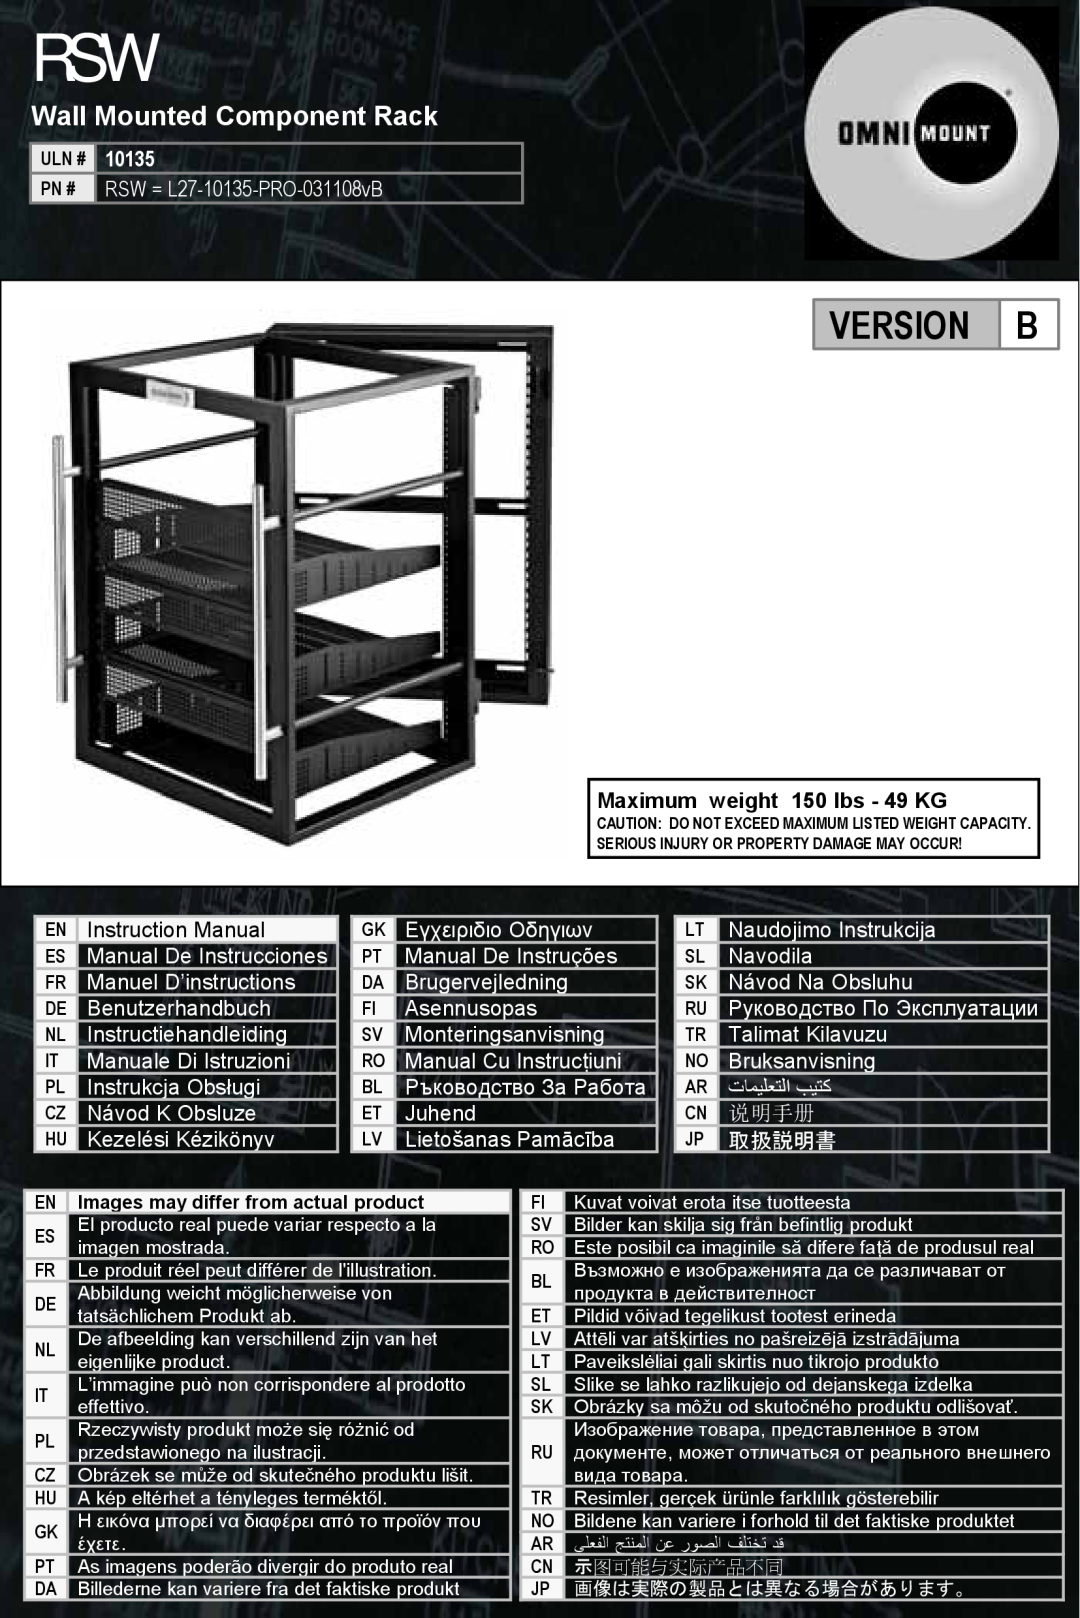 Omnimount 10135, RSW instruction manual Wall Mounted Component Rack, 取扱説明書, Version, 说明手册 